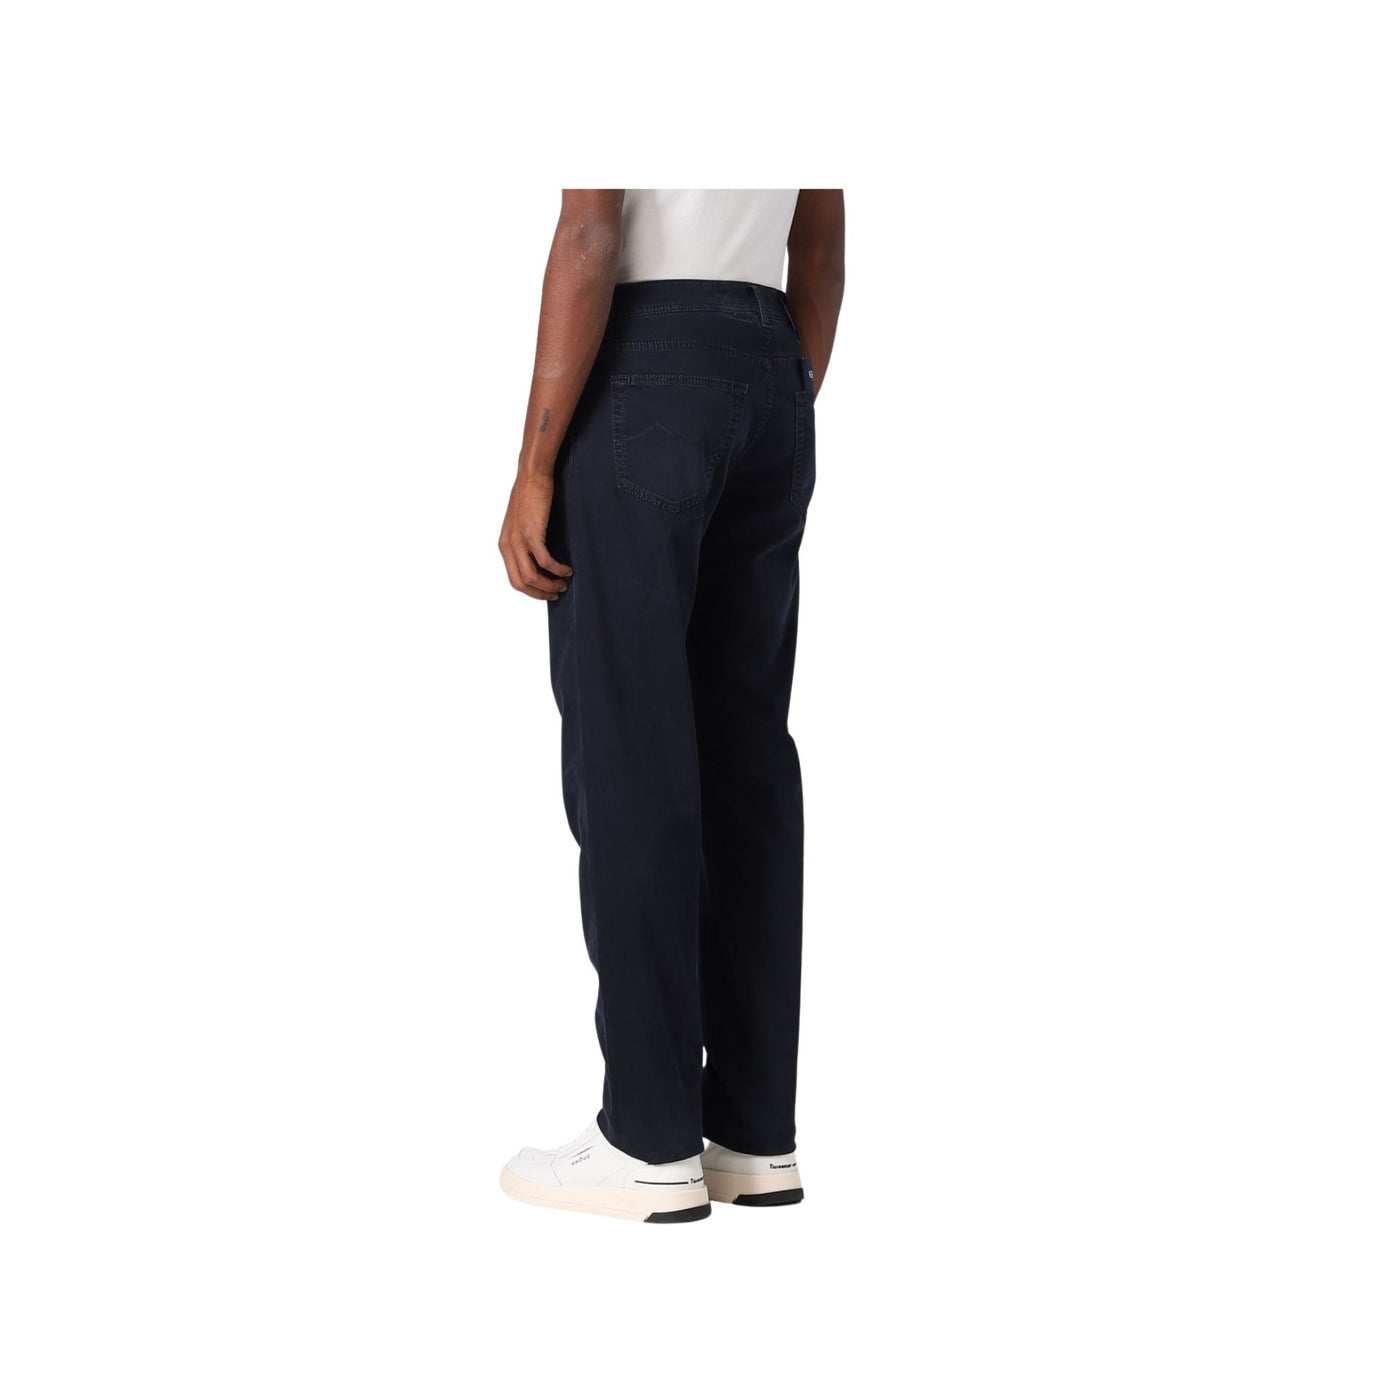 Men's trousers in solid color with straight leg